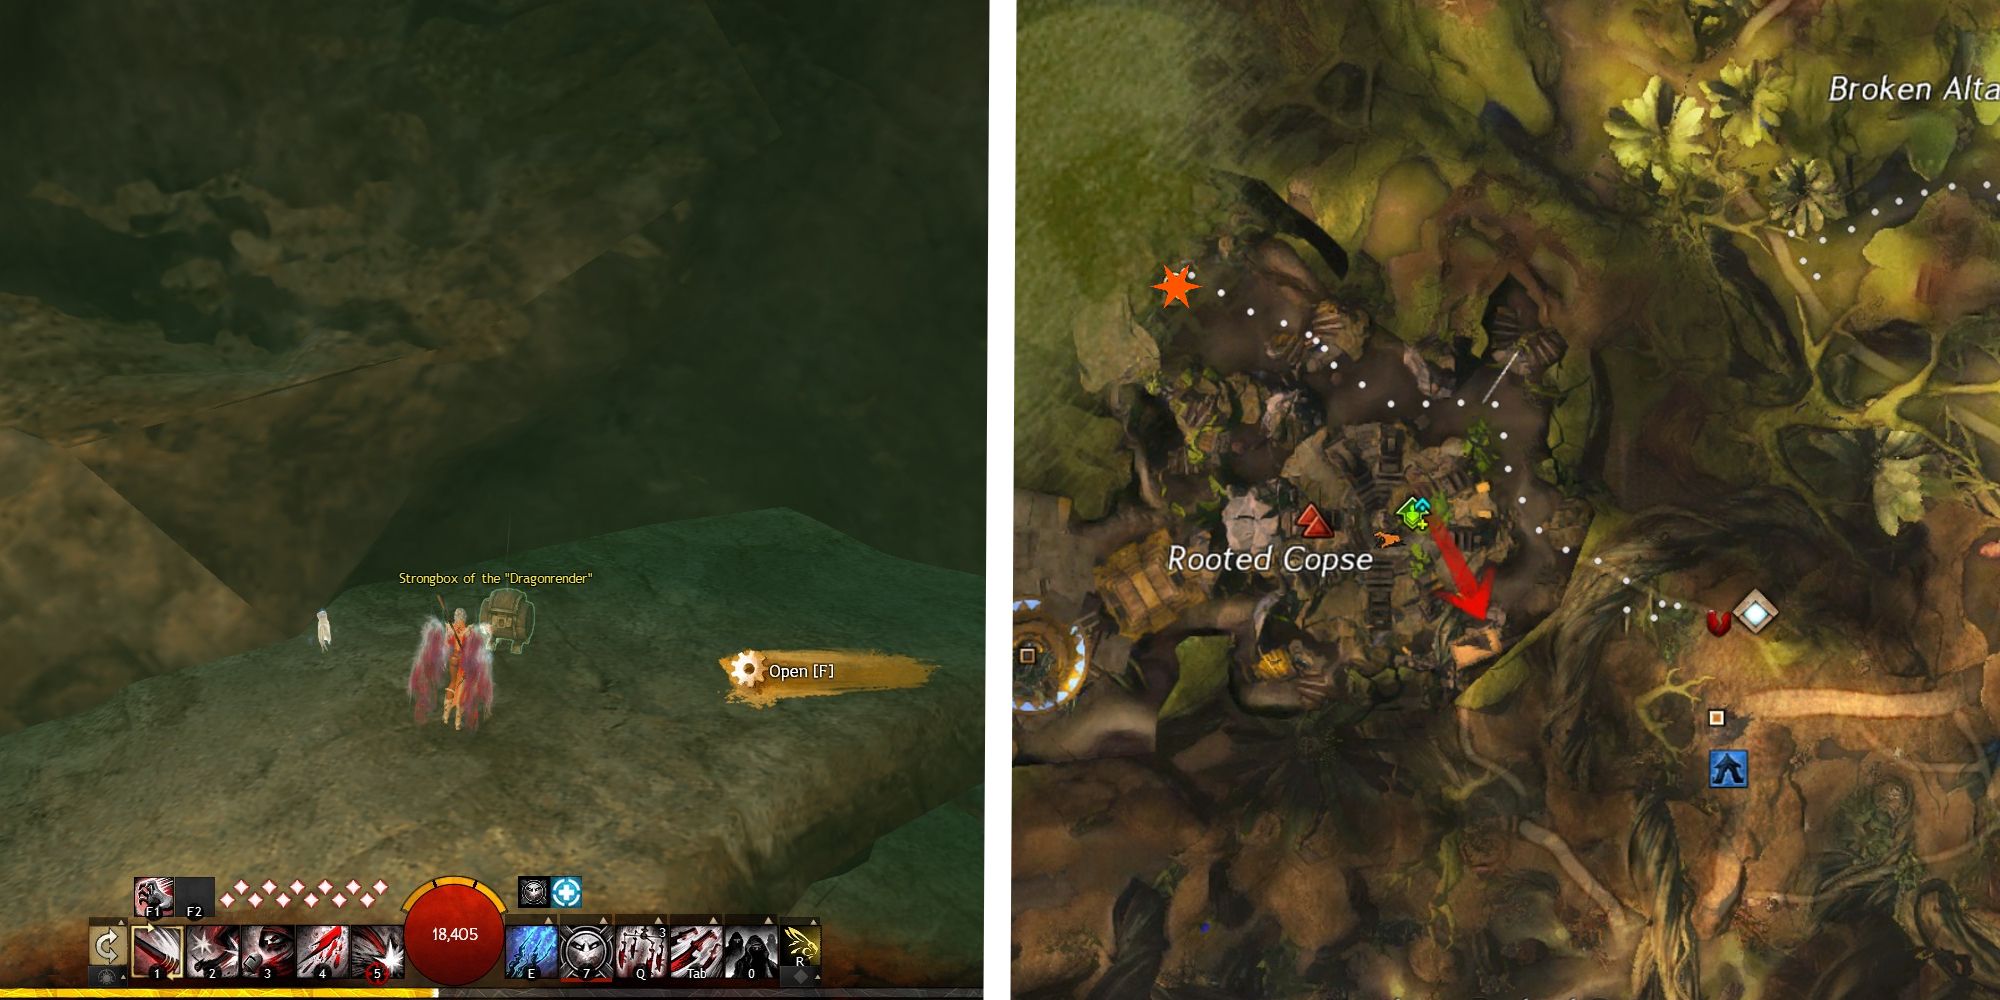 image of dragonrender strongbox next to image of location shown on map